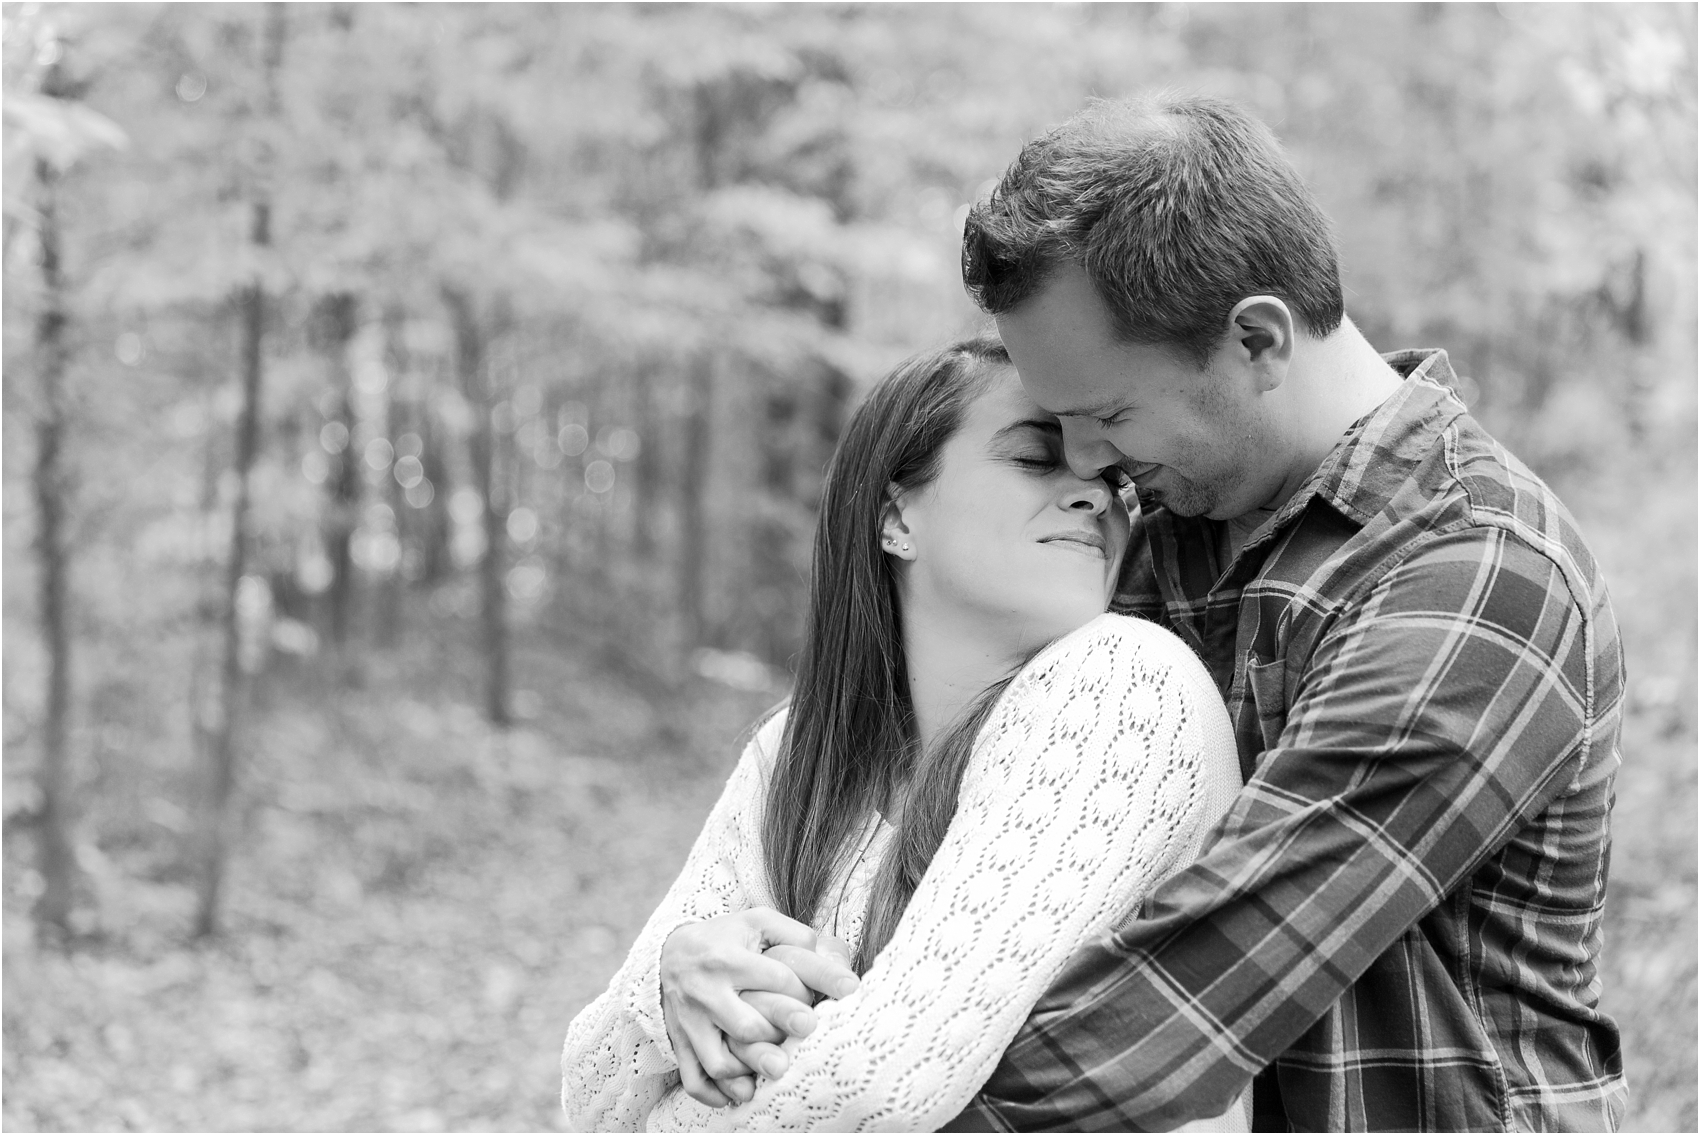 relaxed-autumn-engagement-photos-at-hudson-mills-metropark-in-dexter-mi-by-courtney-carolyn-photography_0012.jpg